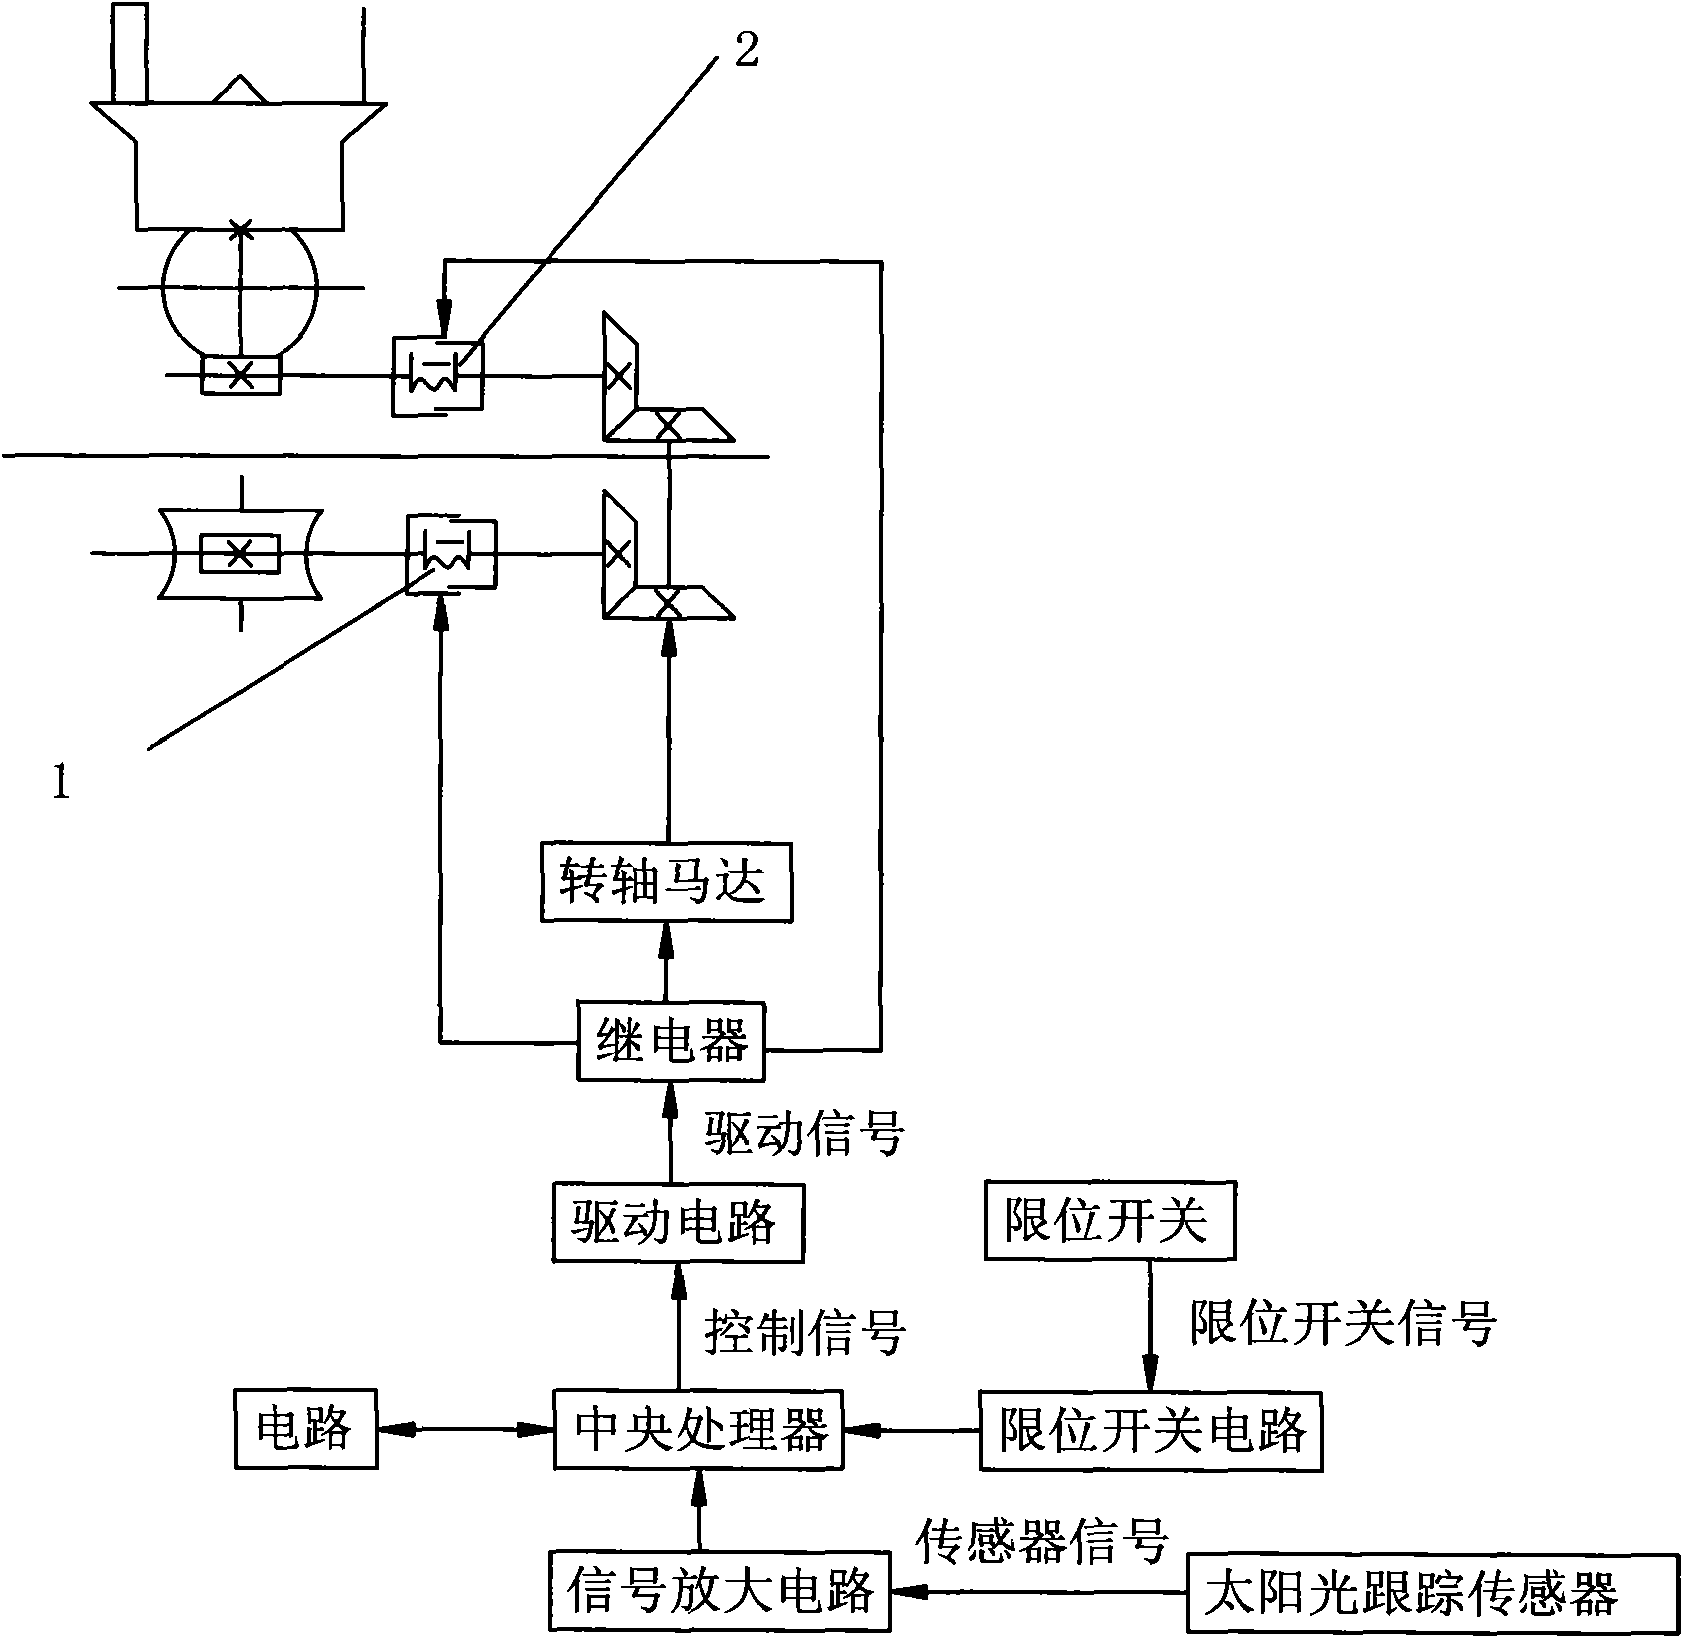 Control method of sunlight collector